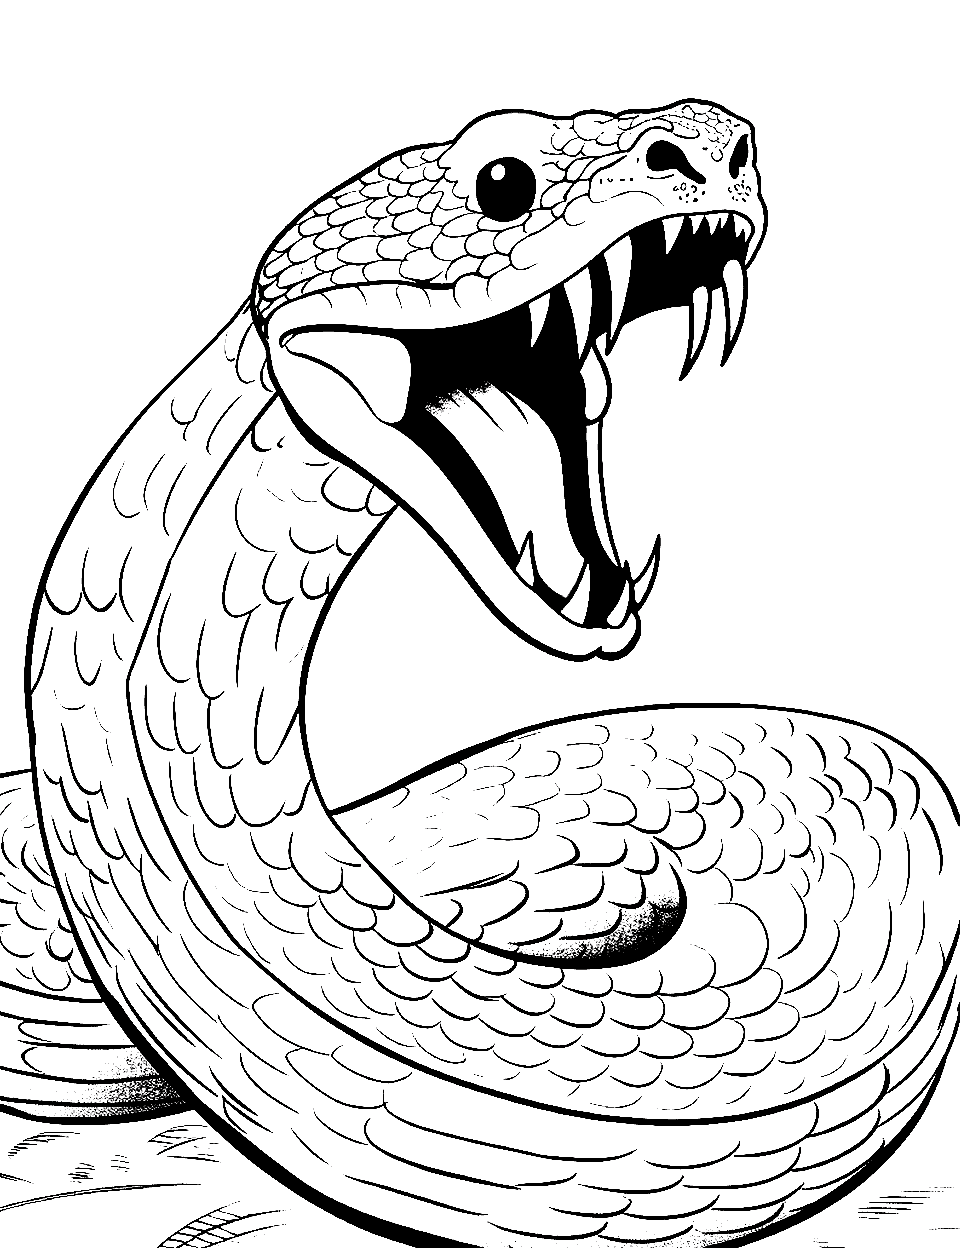 Defensive Snake Attack Coloring Page - A snake in an attack position with a raised head and open mouth.